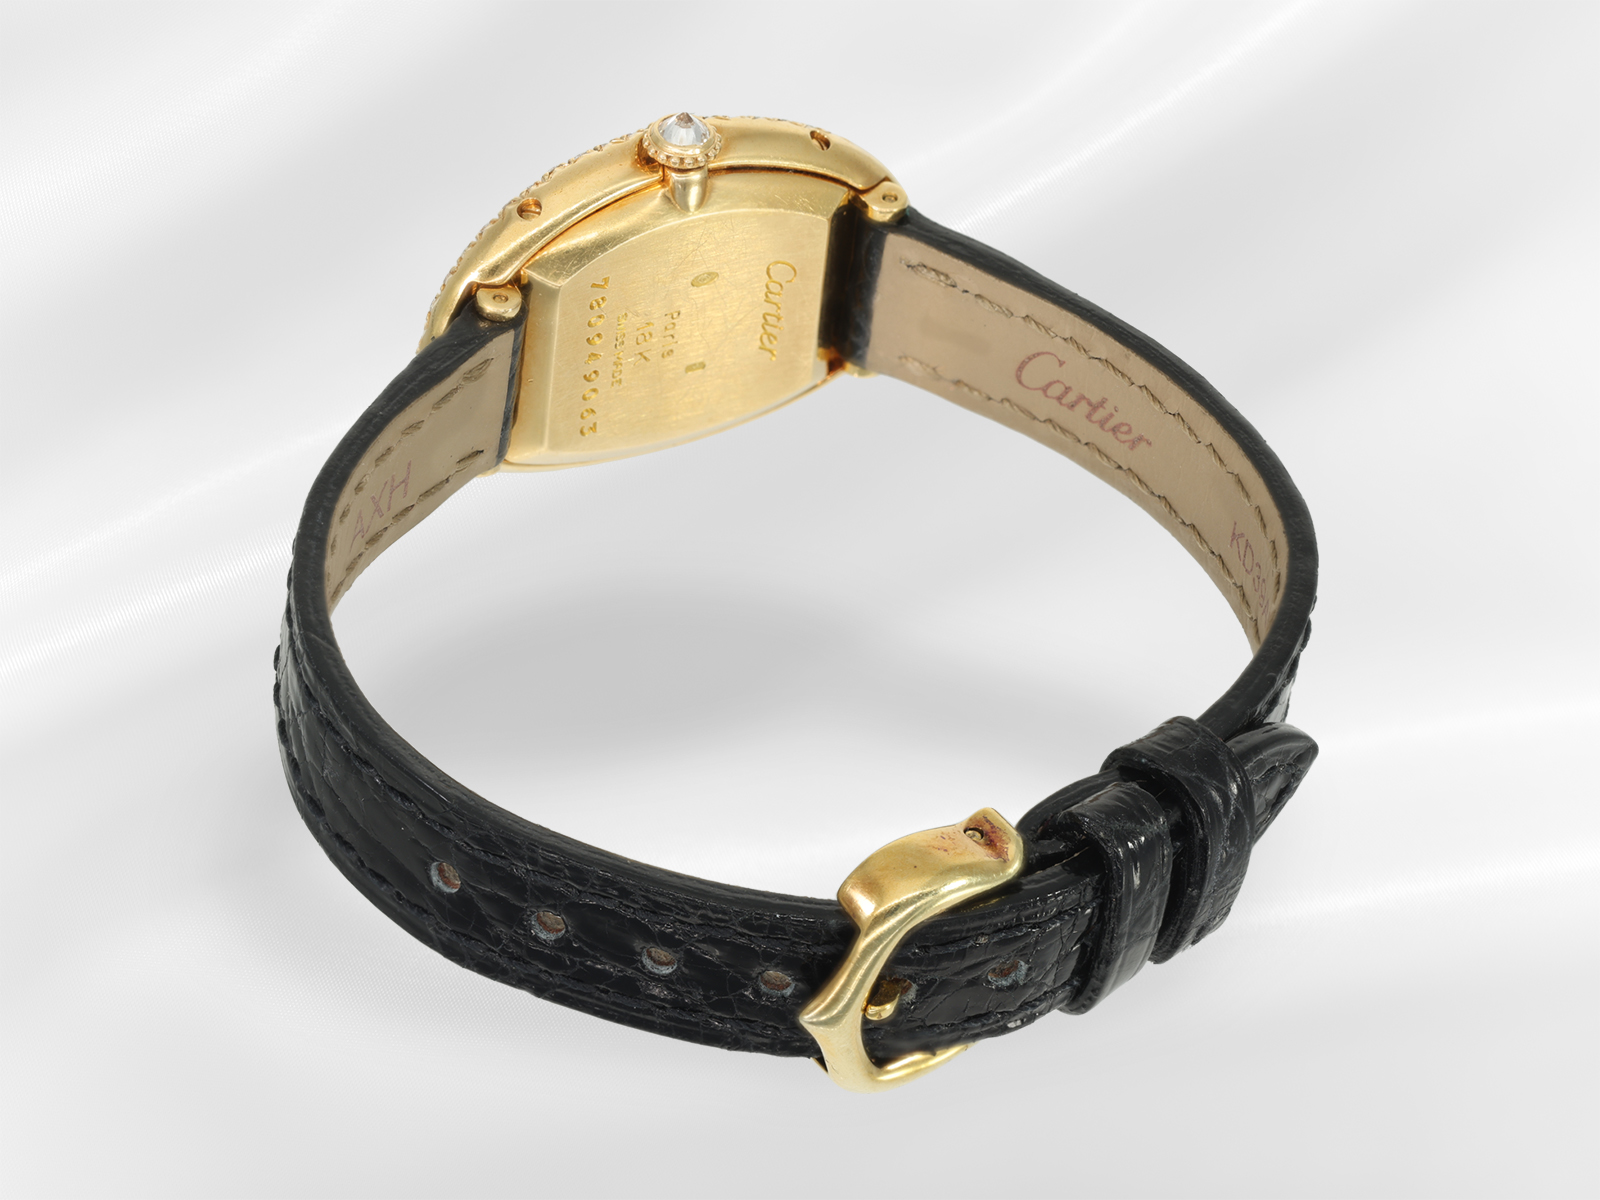 Wristwatch: luxurious, rare Cartier Baignoire ladies' wristwatch in 18K yellow gold with brilliant-c - Image 4 of 4